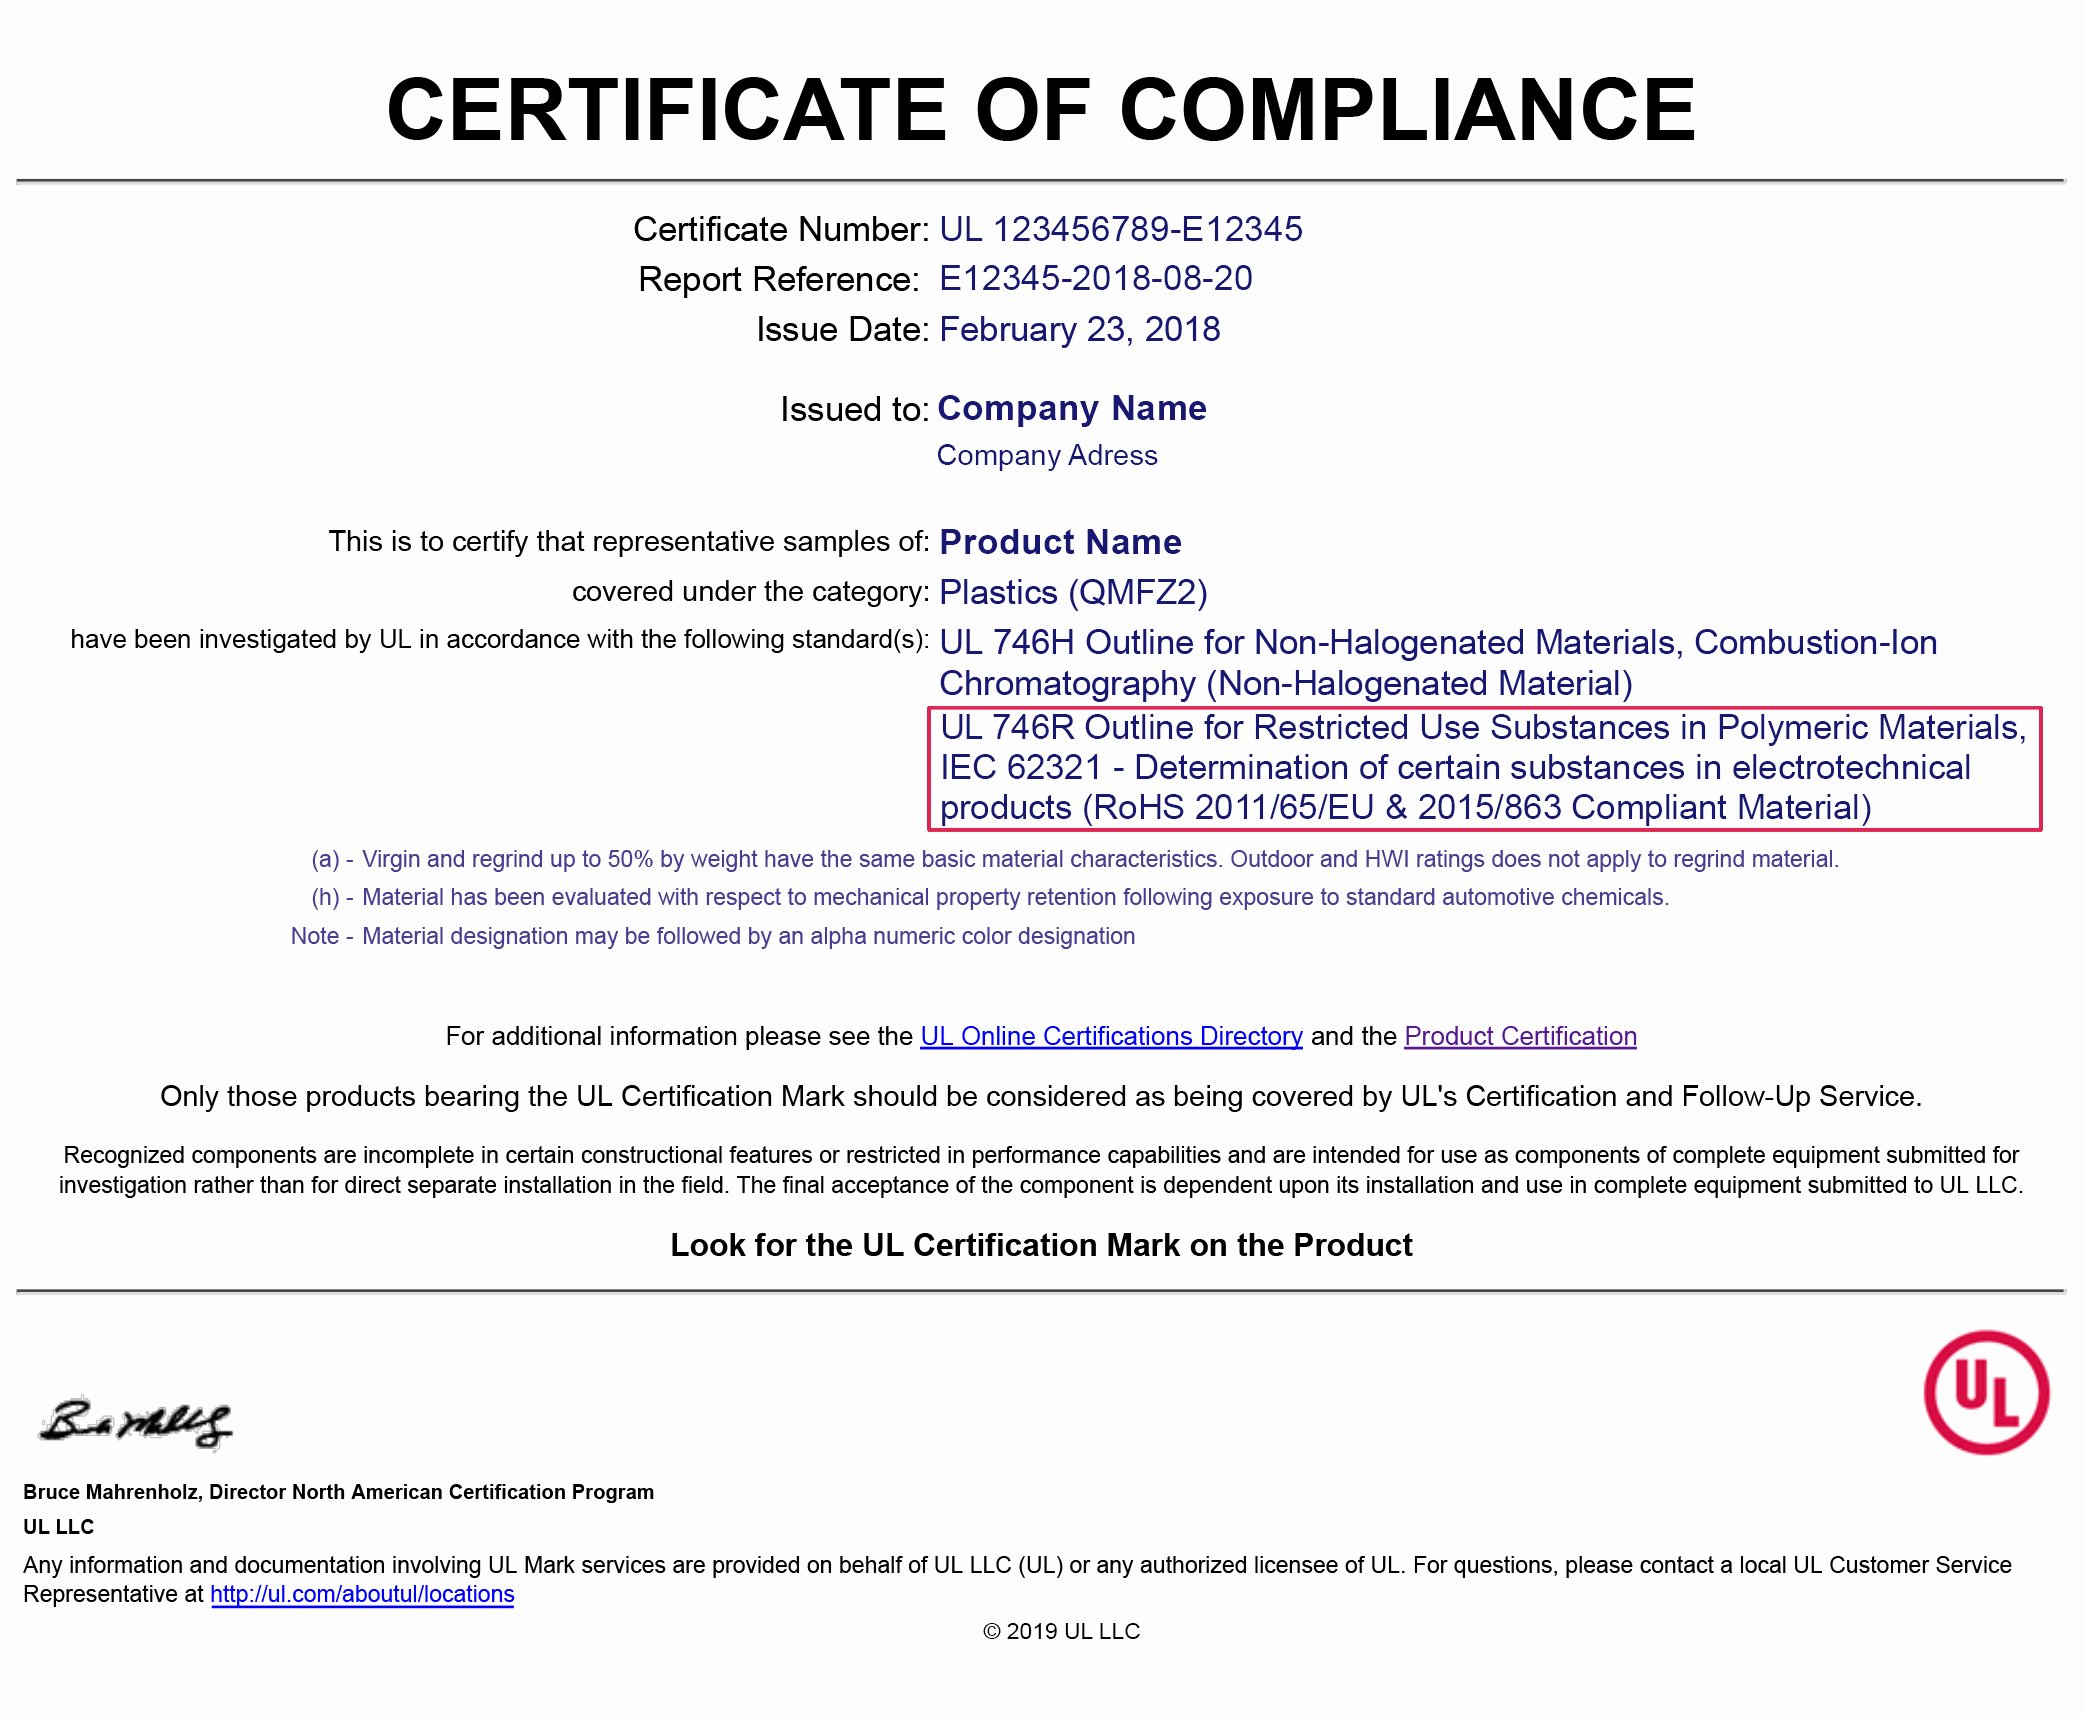 Rohs 2 Certificate Of Compliance Template Fresh are You Ready for the New Rohs Substance Phase In